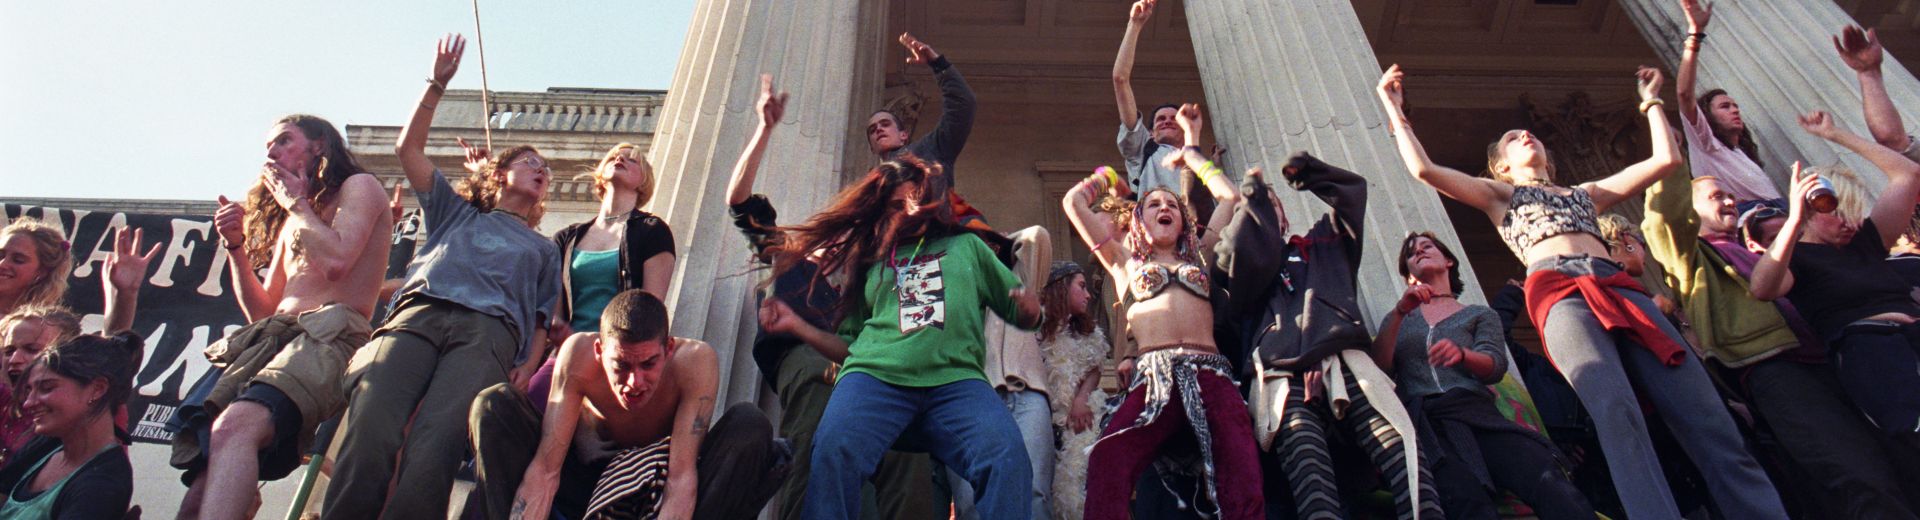 Reclaim the Streets activists gather in Trafalgar Square in 1997